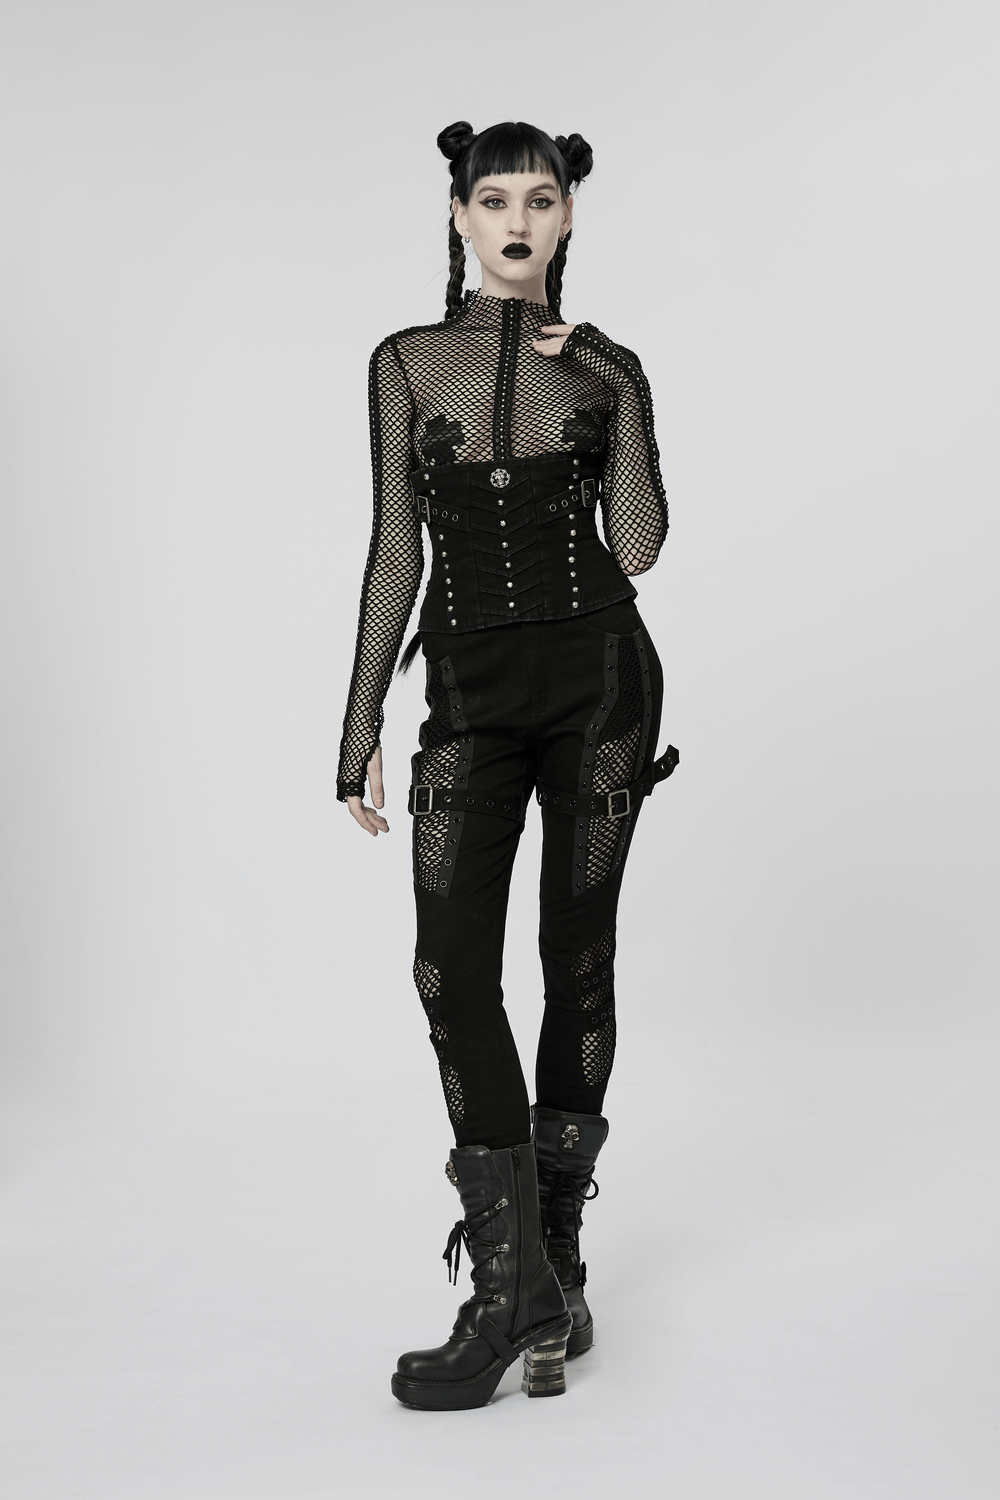 Chic Mesh Insert Gothic Trousers for Edgy Fashion - HARD'N'HEAVY